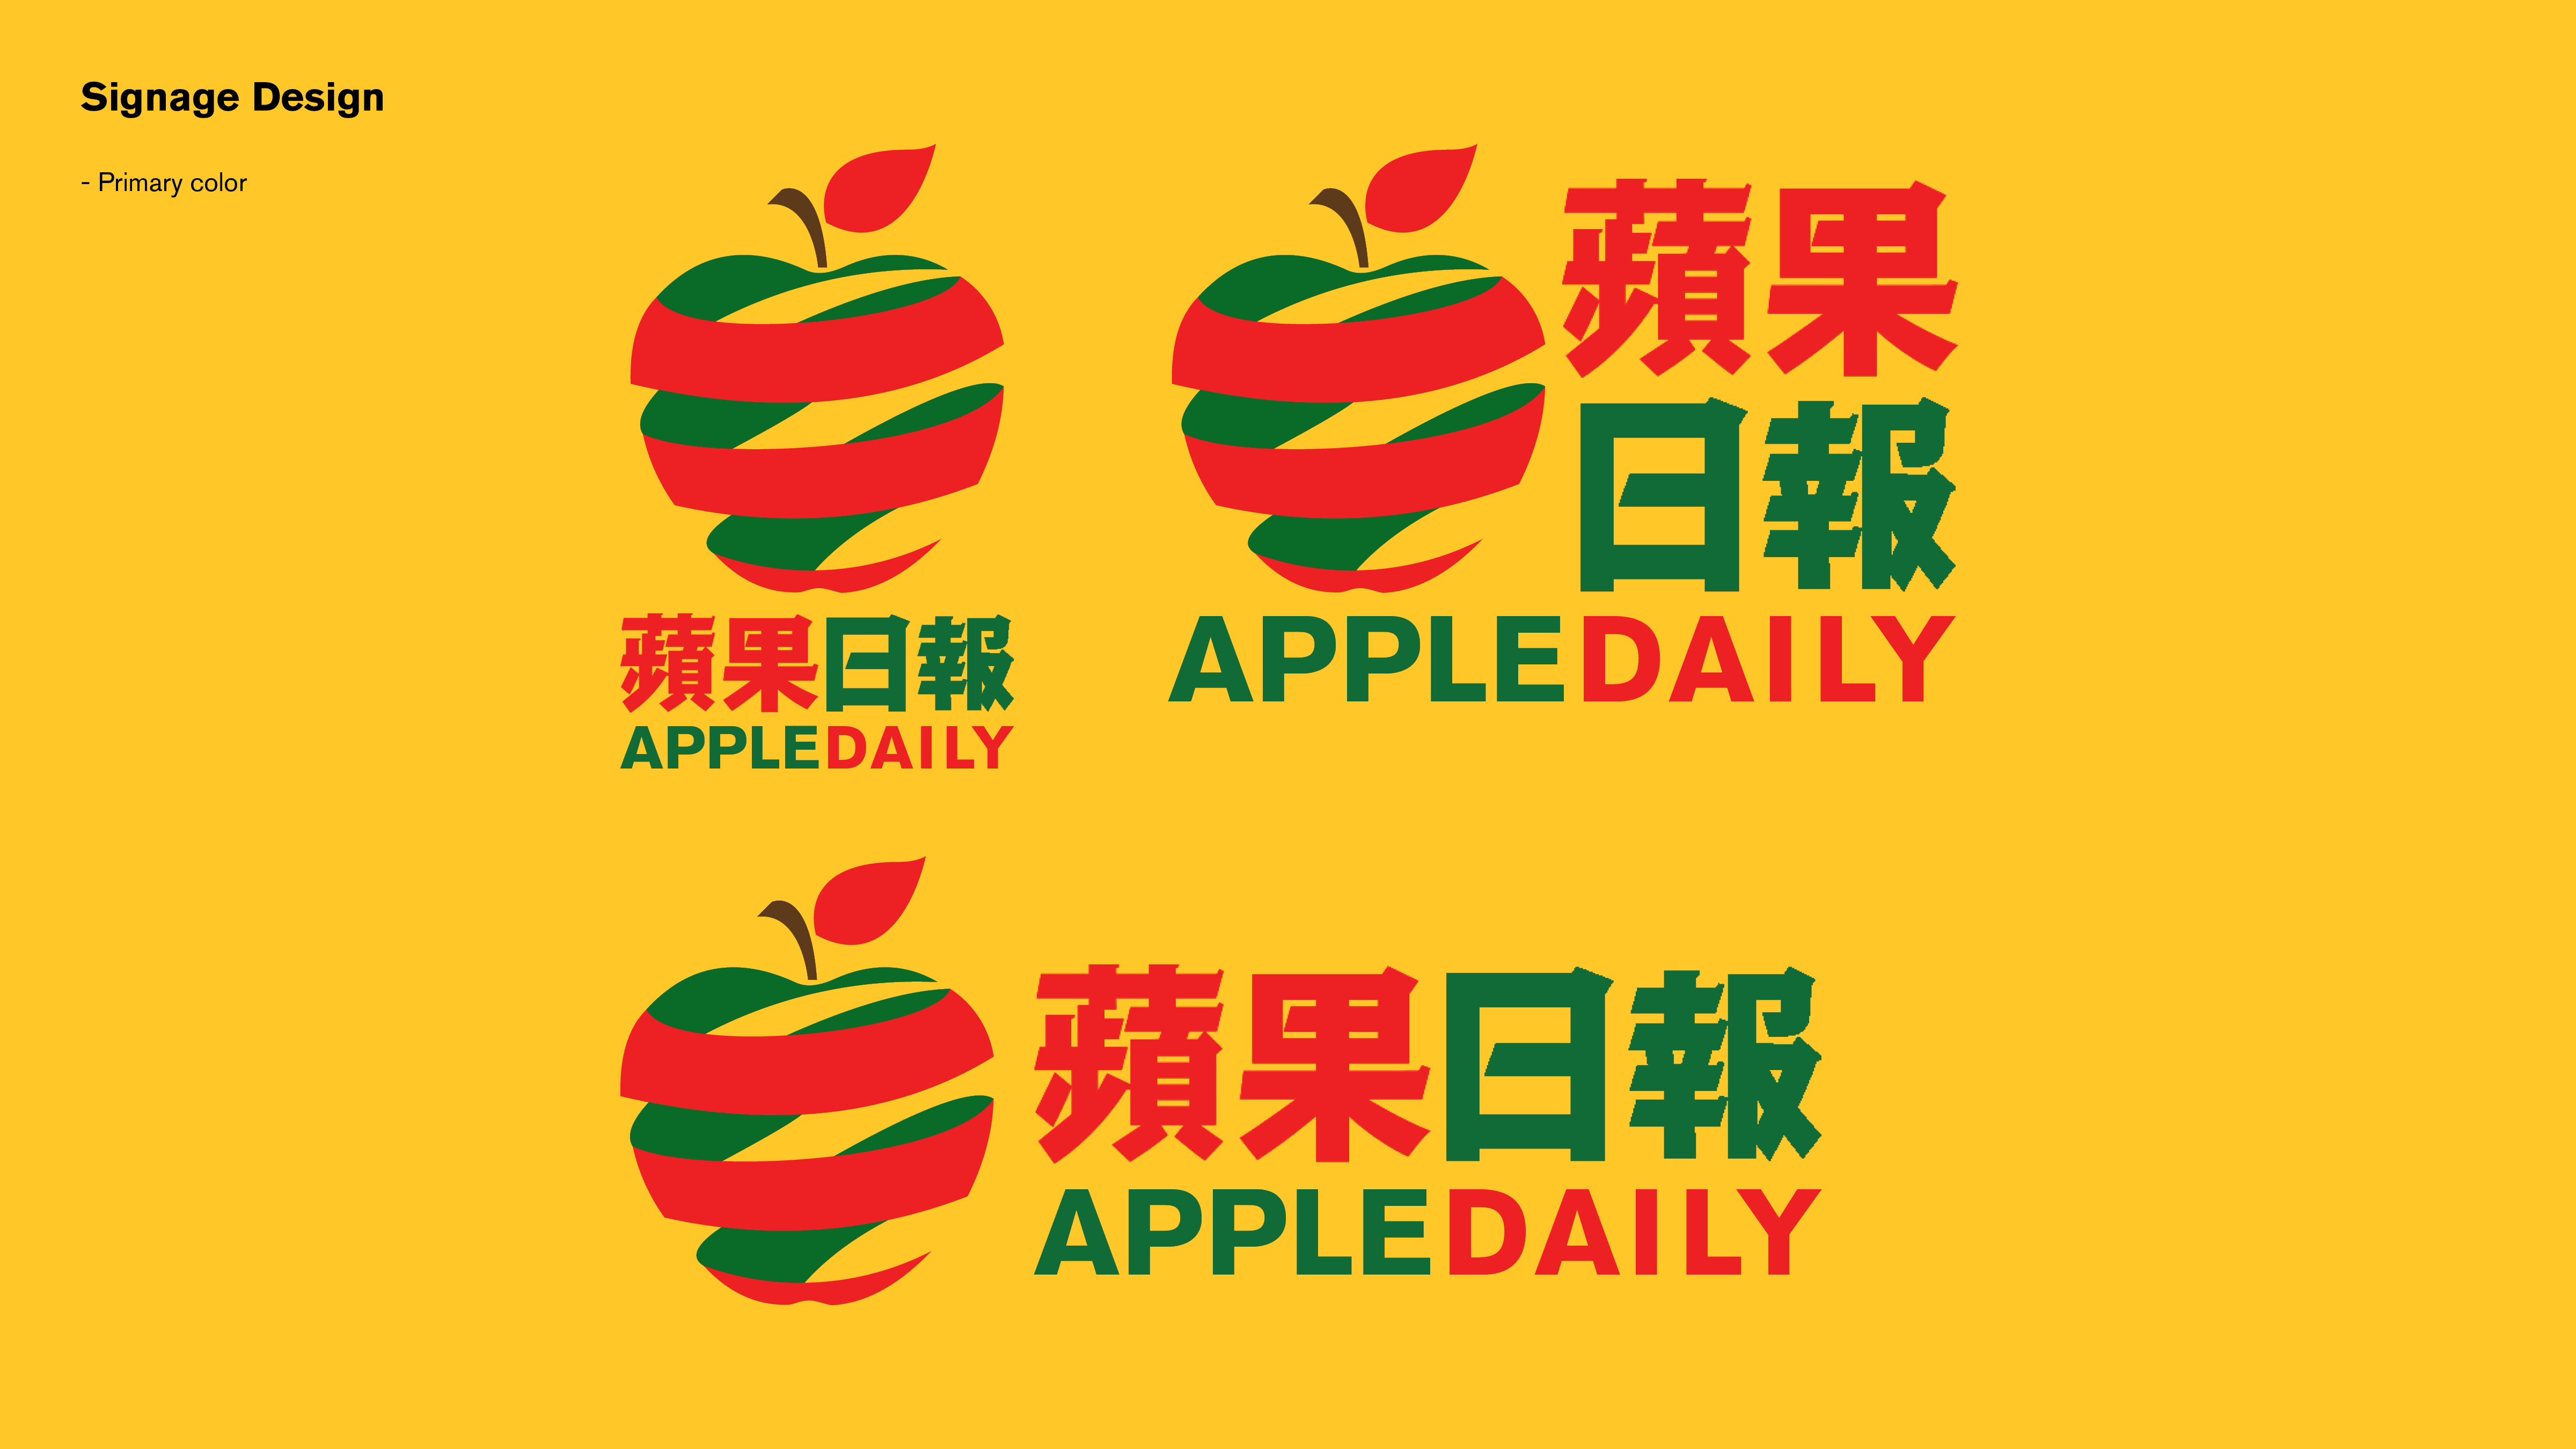 featured image five:Hong Kong Apple Daily Redesign Project